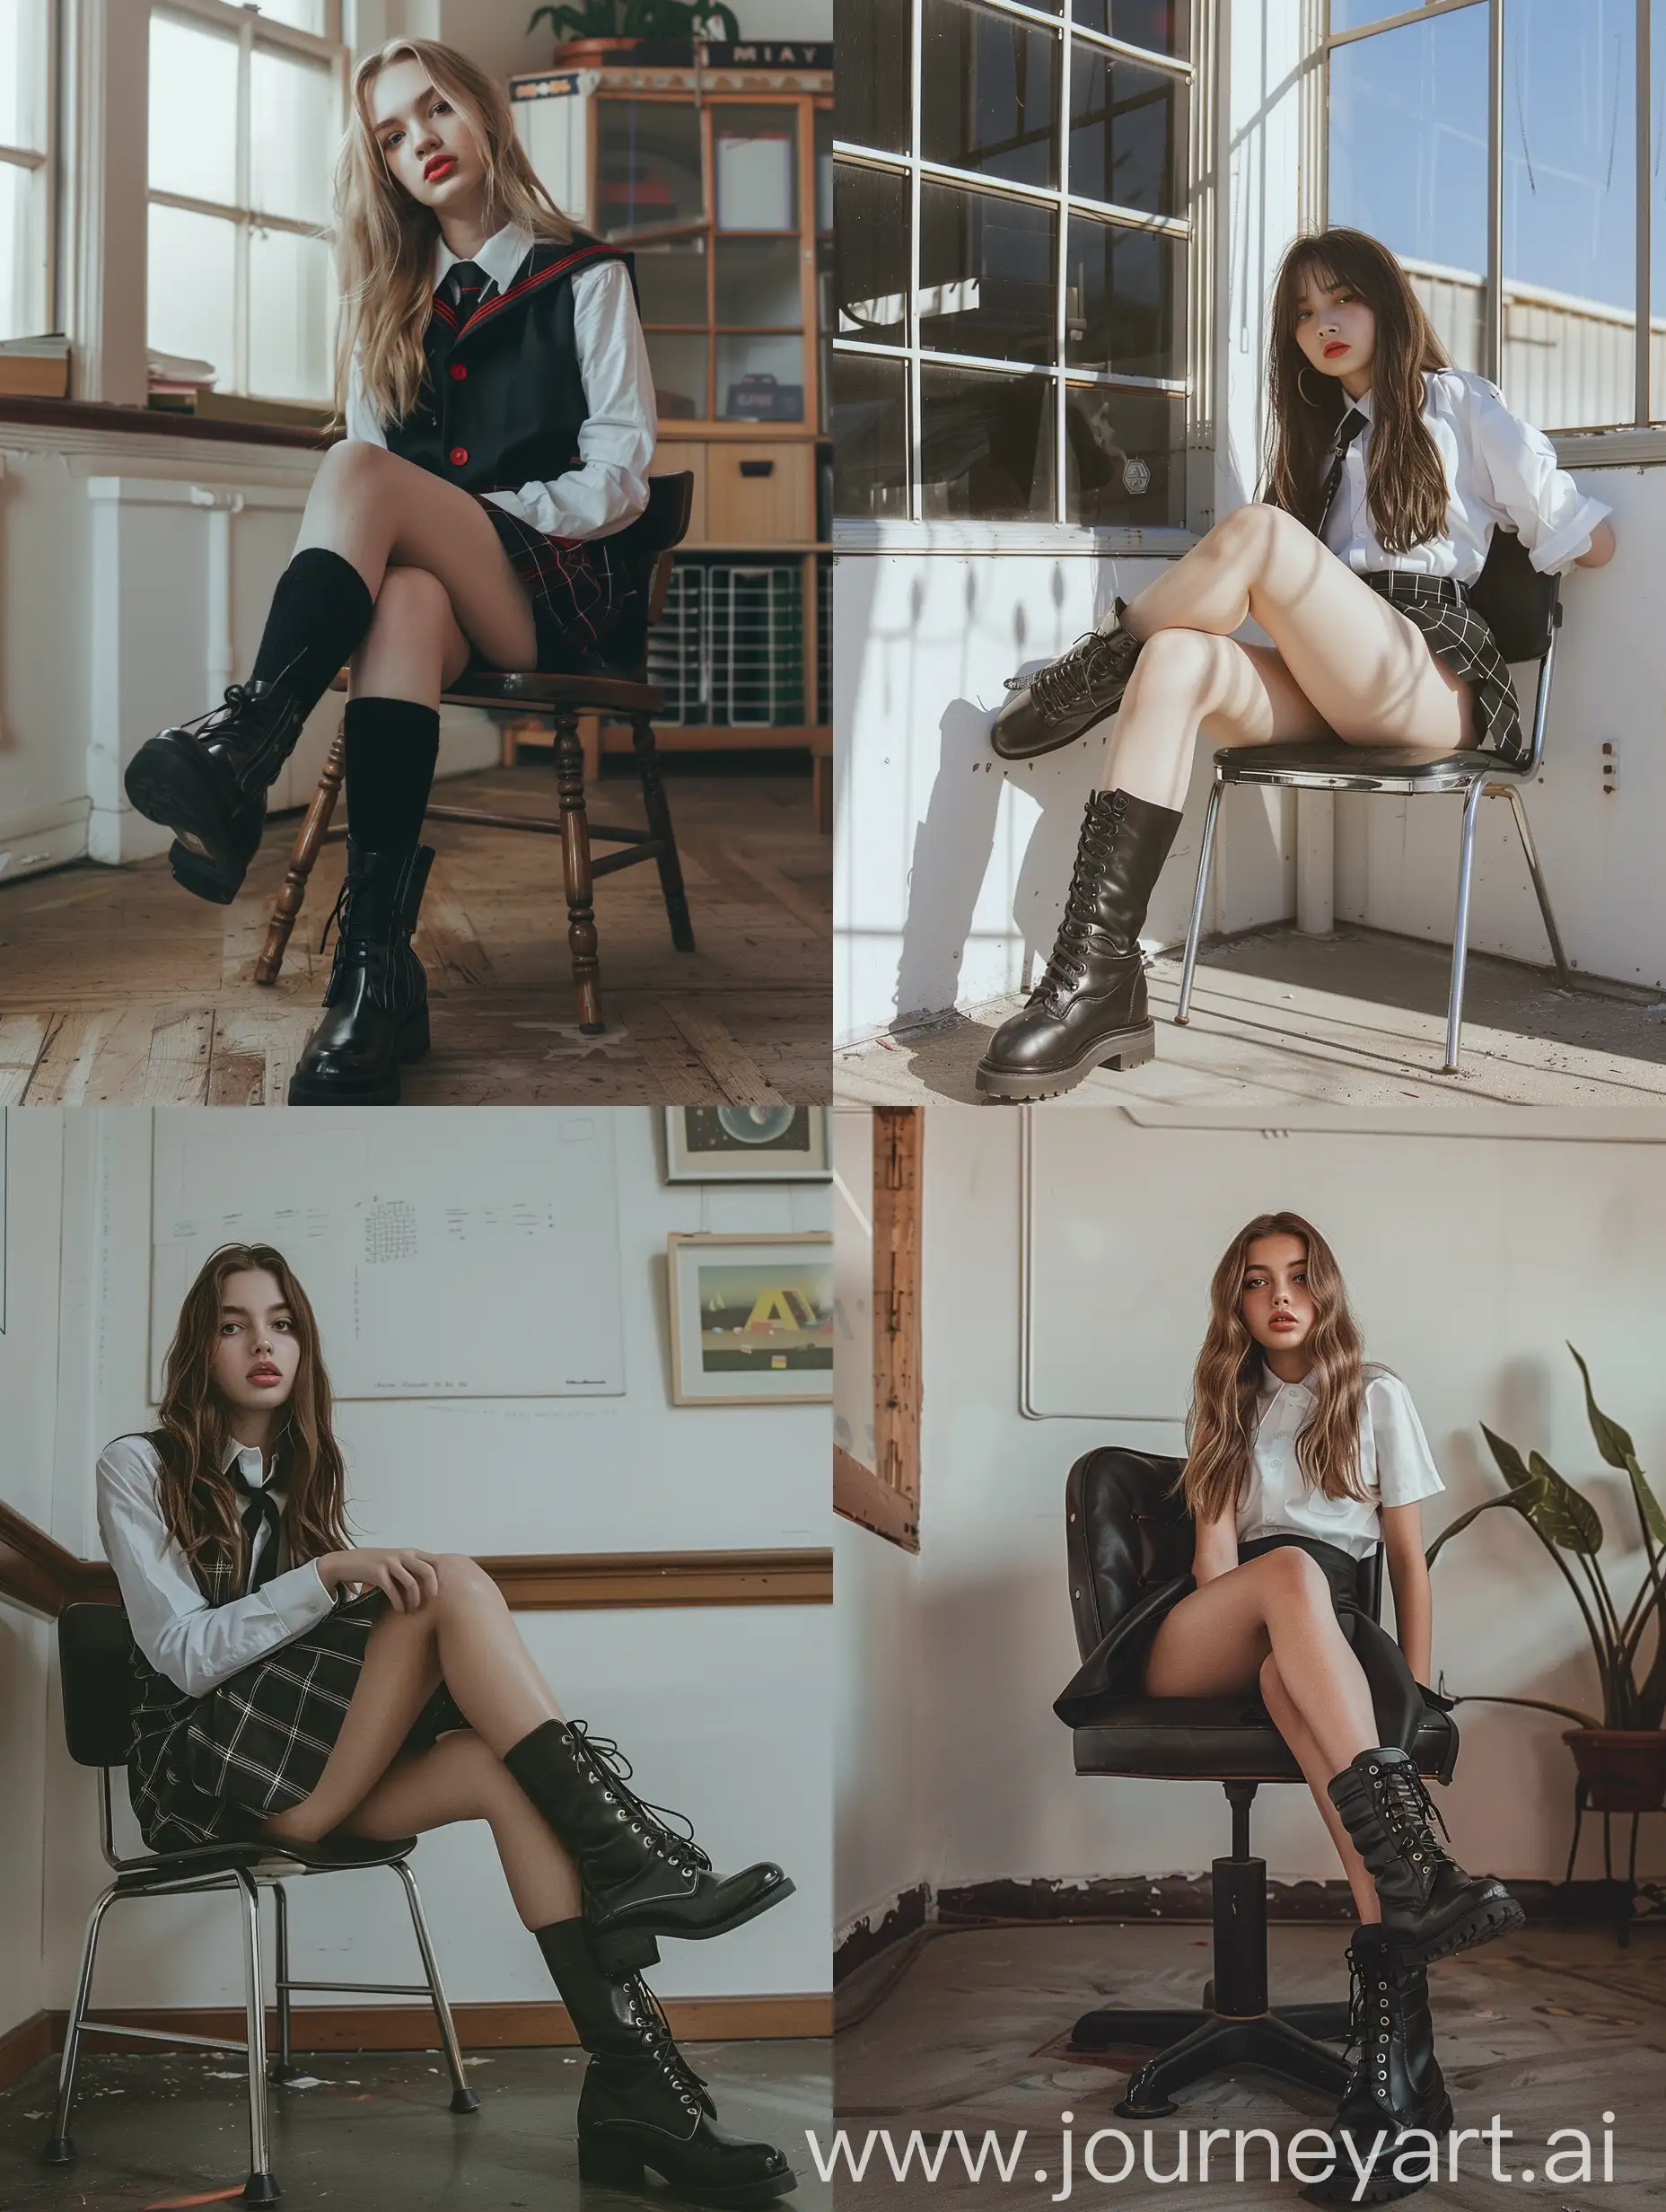 Teenage-Girl-Influencer-Sitting-in-School-Uniform-and-Black-Boots